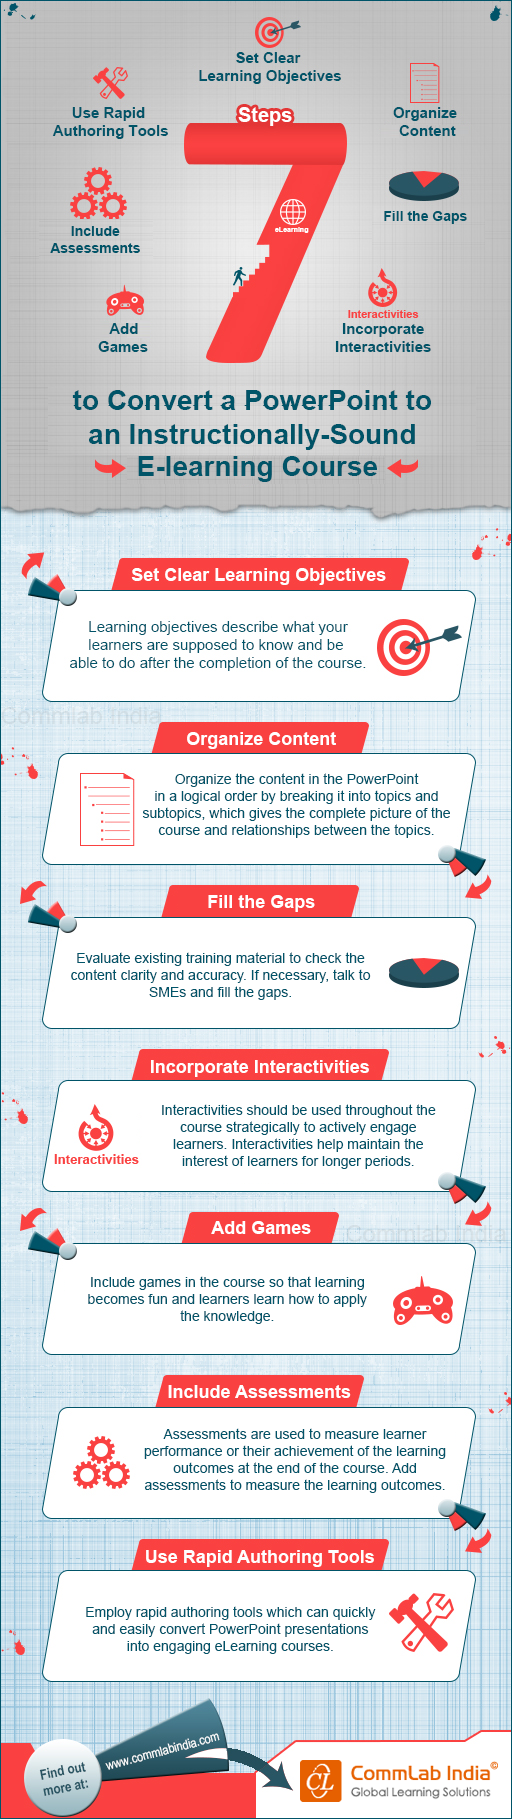 7 Steps to Convert a PowerPoint to an Instructionally-Sound E-learning Course [Infographic]